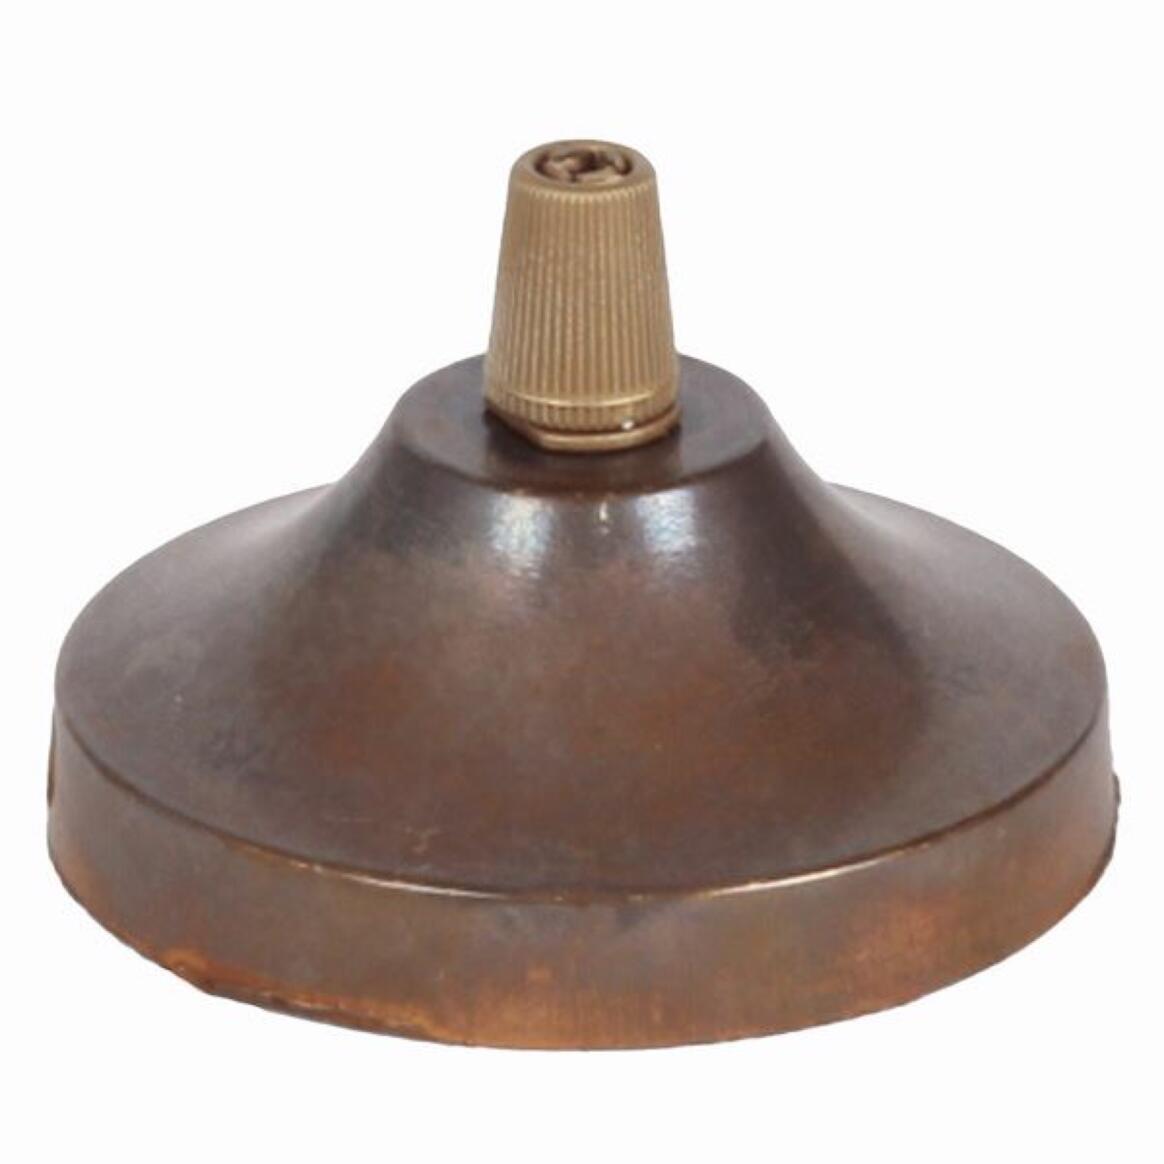 Brass ceiling rose light fitting, concave with cord grip main product image